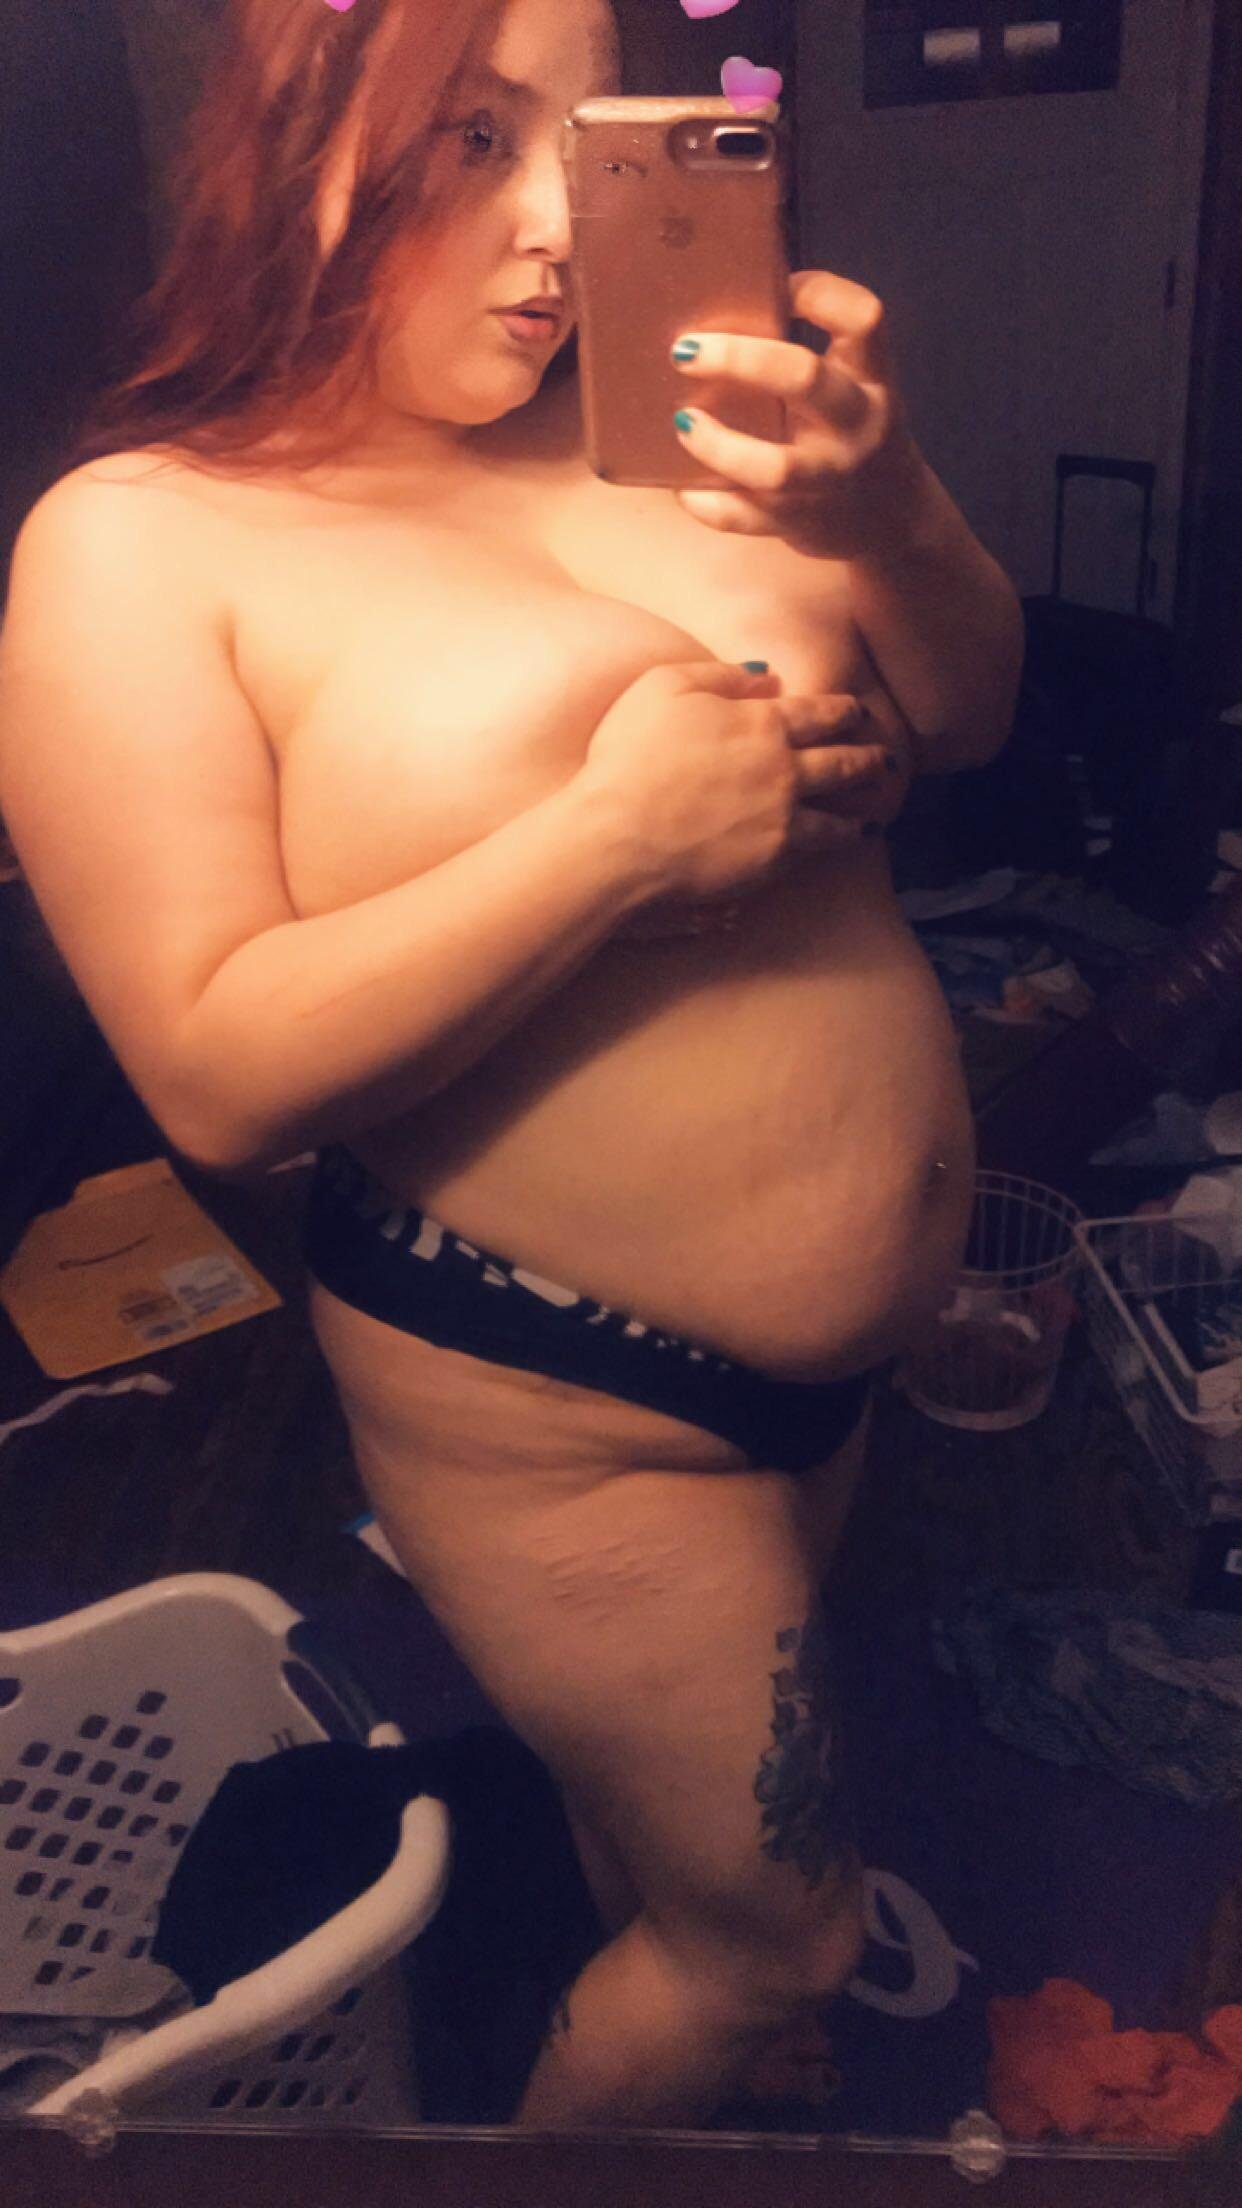 Been feeling really insecure about this weight gain recently and just my appearance in general... nice to have a place where my belly is appreciated 